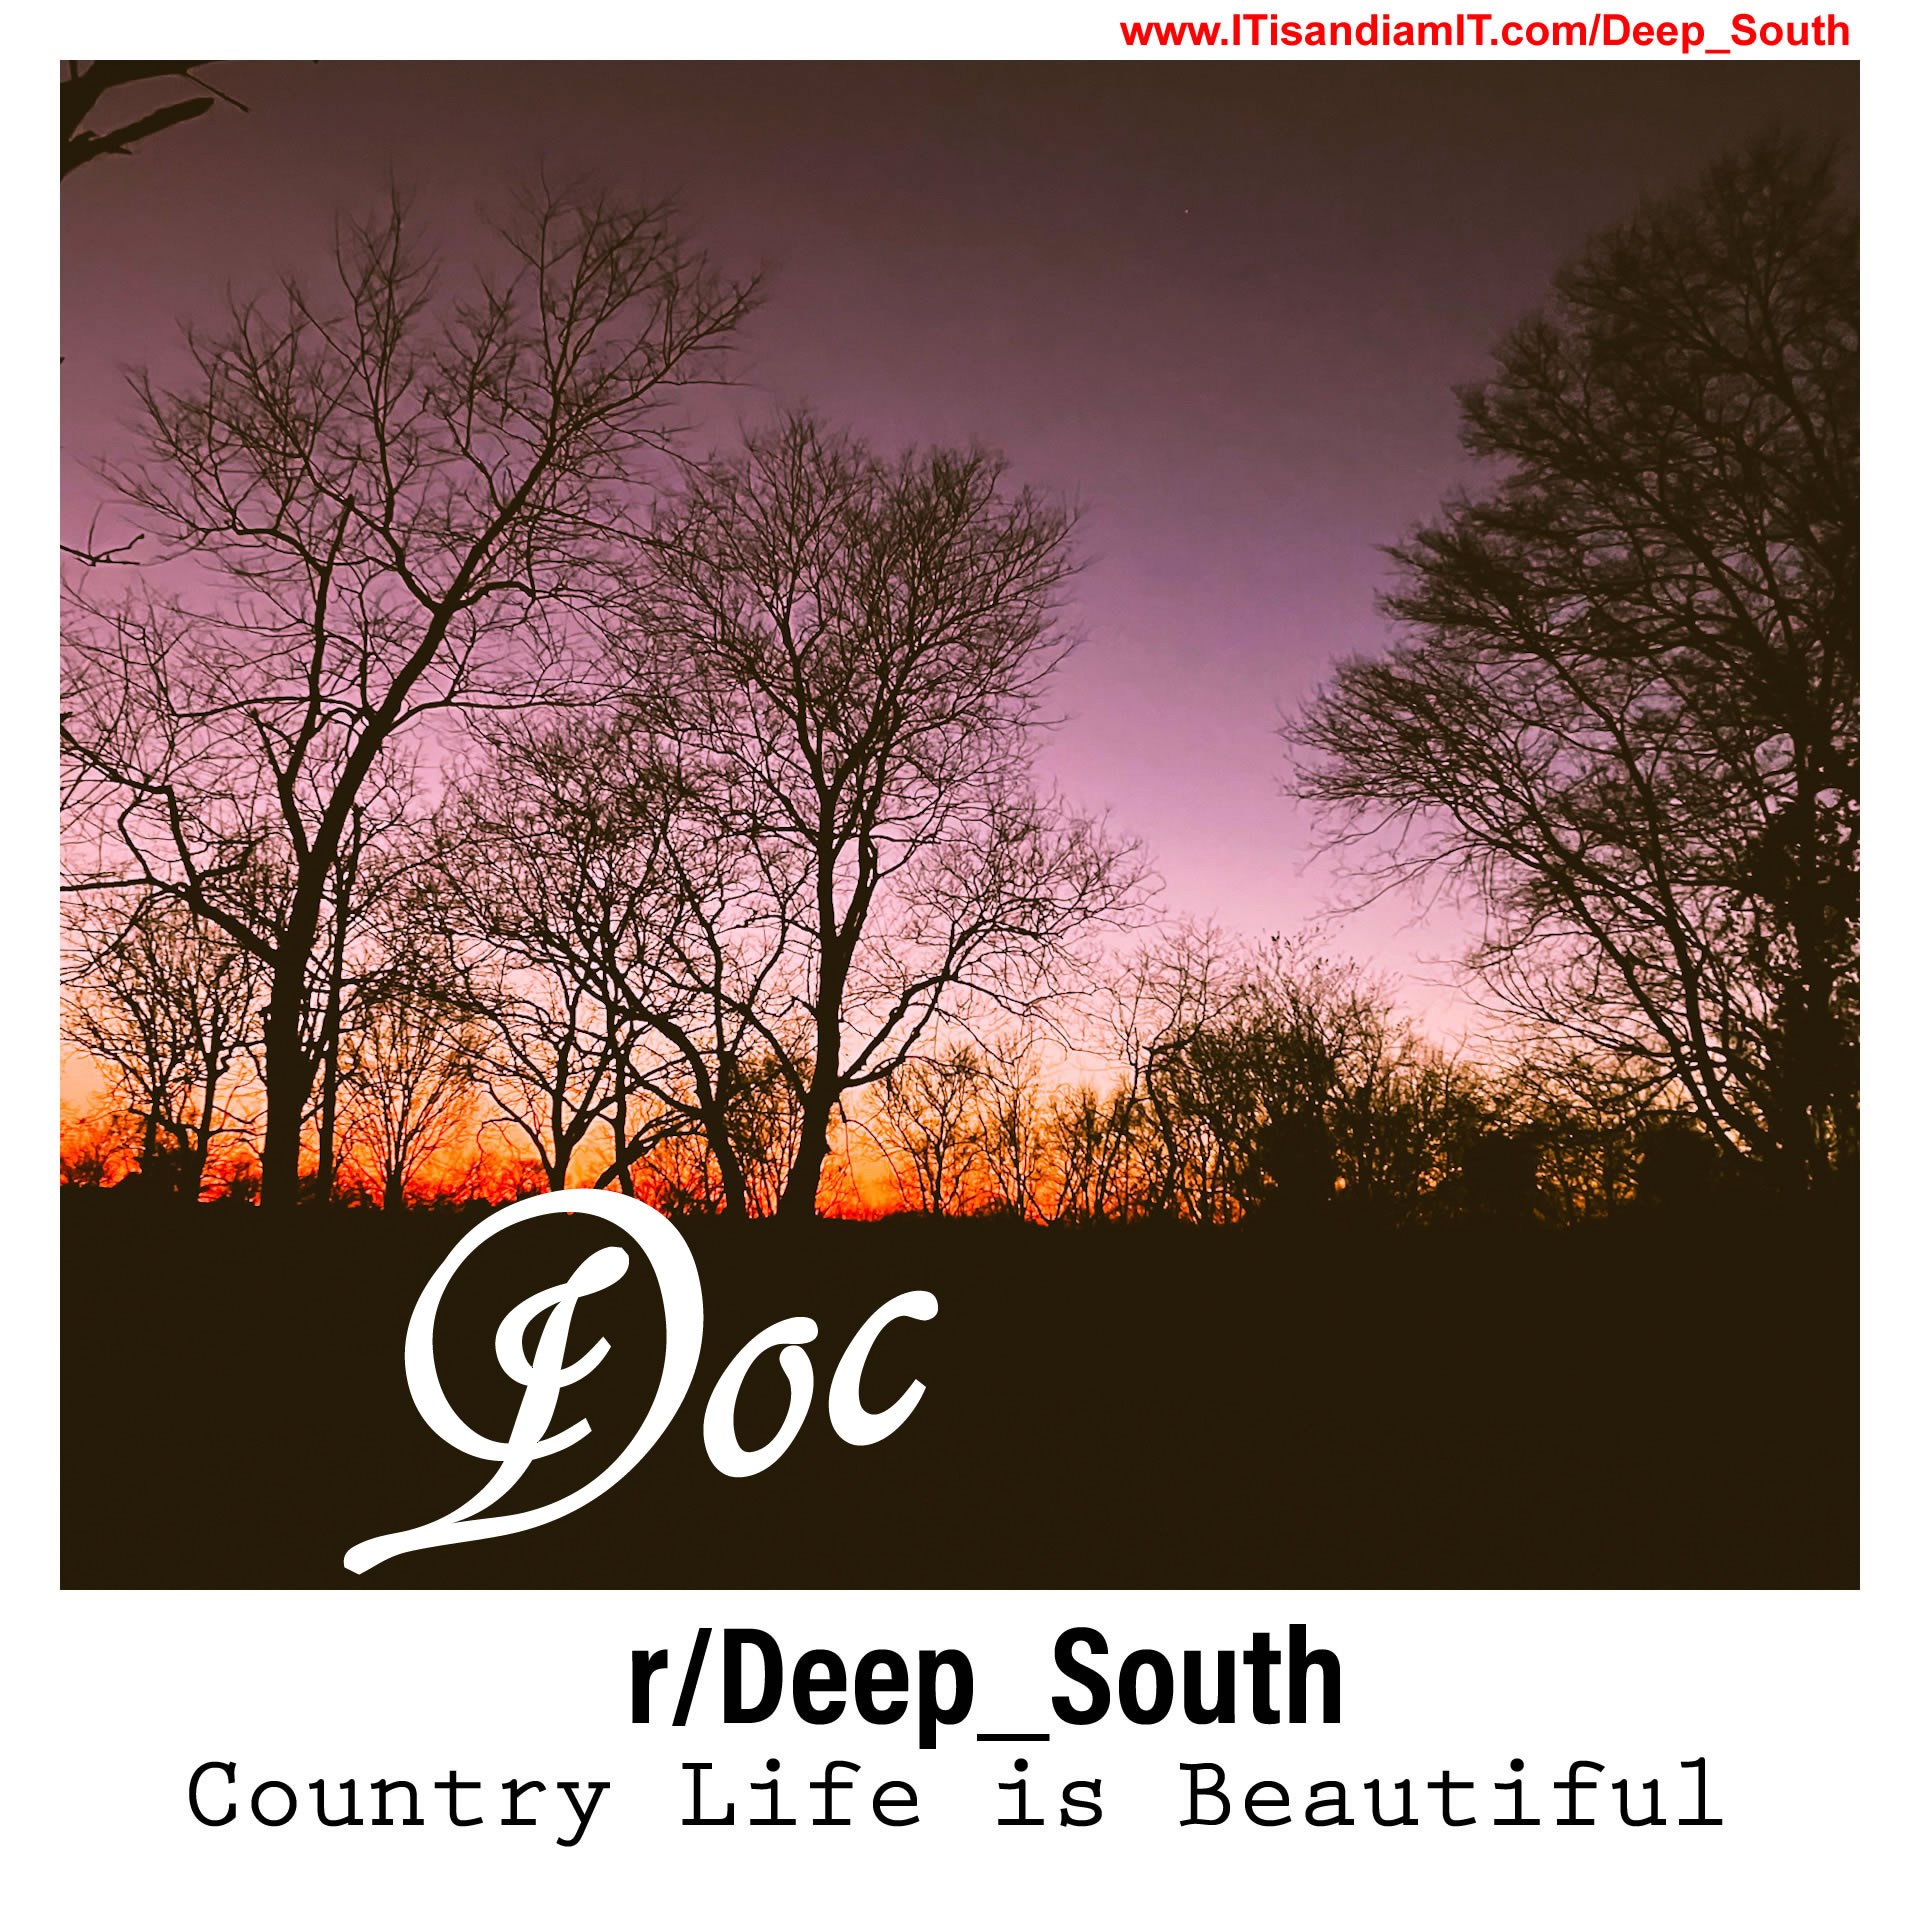 Country Life is Beautiful Doc enjoys his weekend in the Deep South of Southern Middle Tennessee